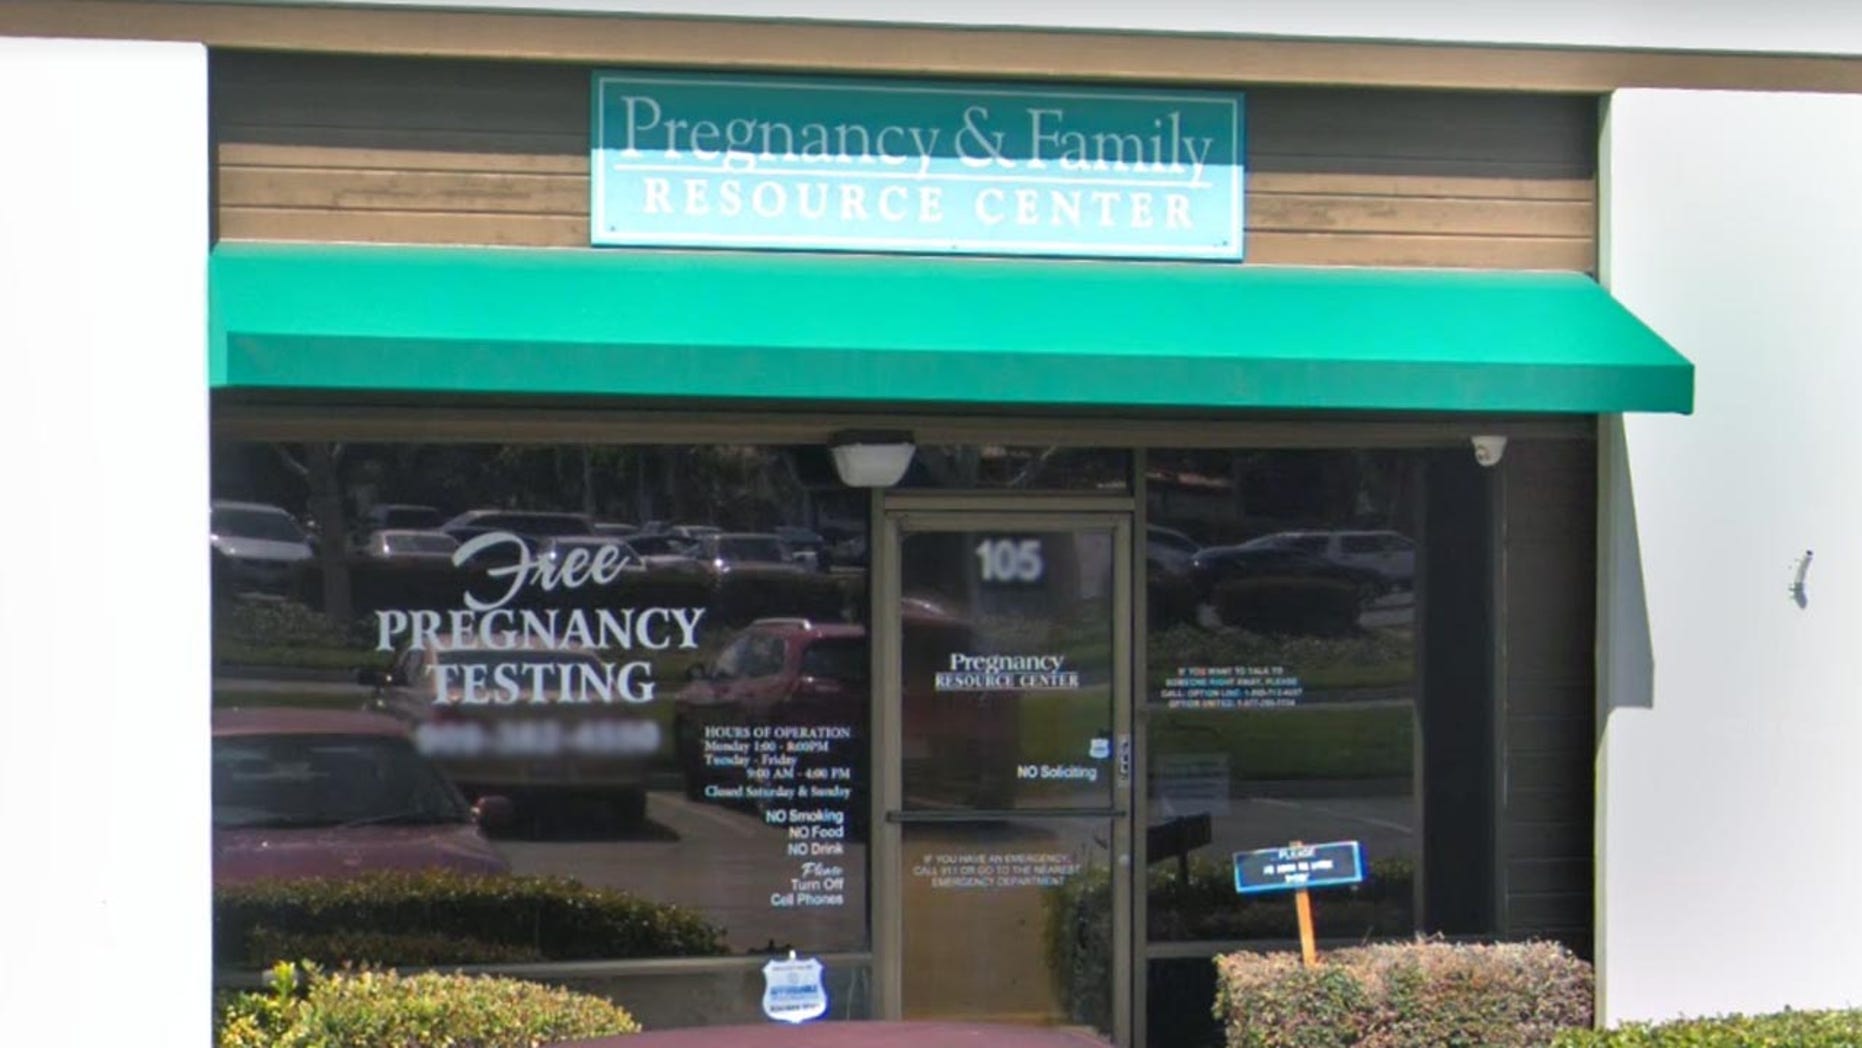 California was ordered to pay three pro-life centers, including Pregnancy & Family Resource Center, after a state law tried to force the centers to promote abortion.